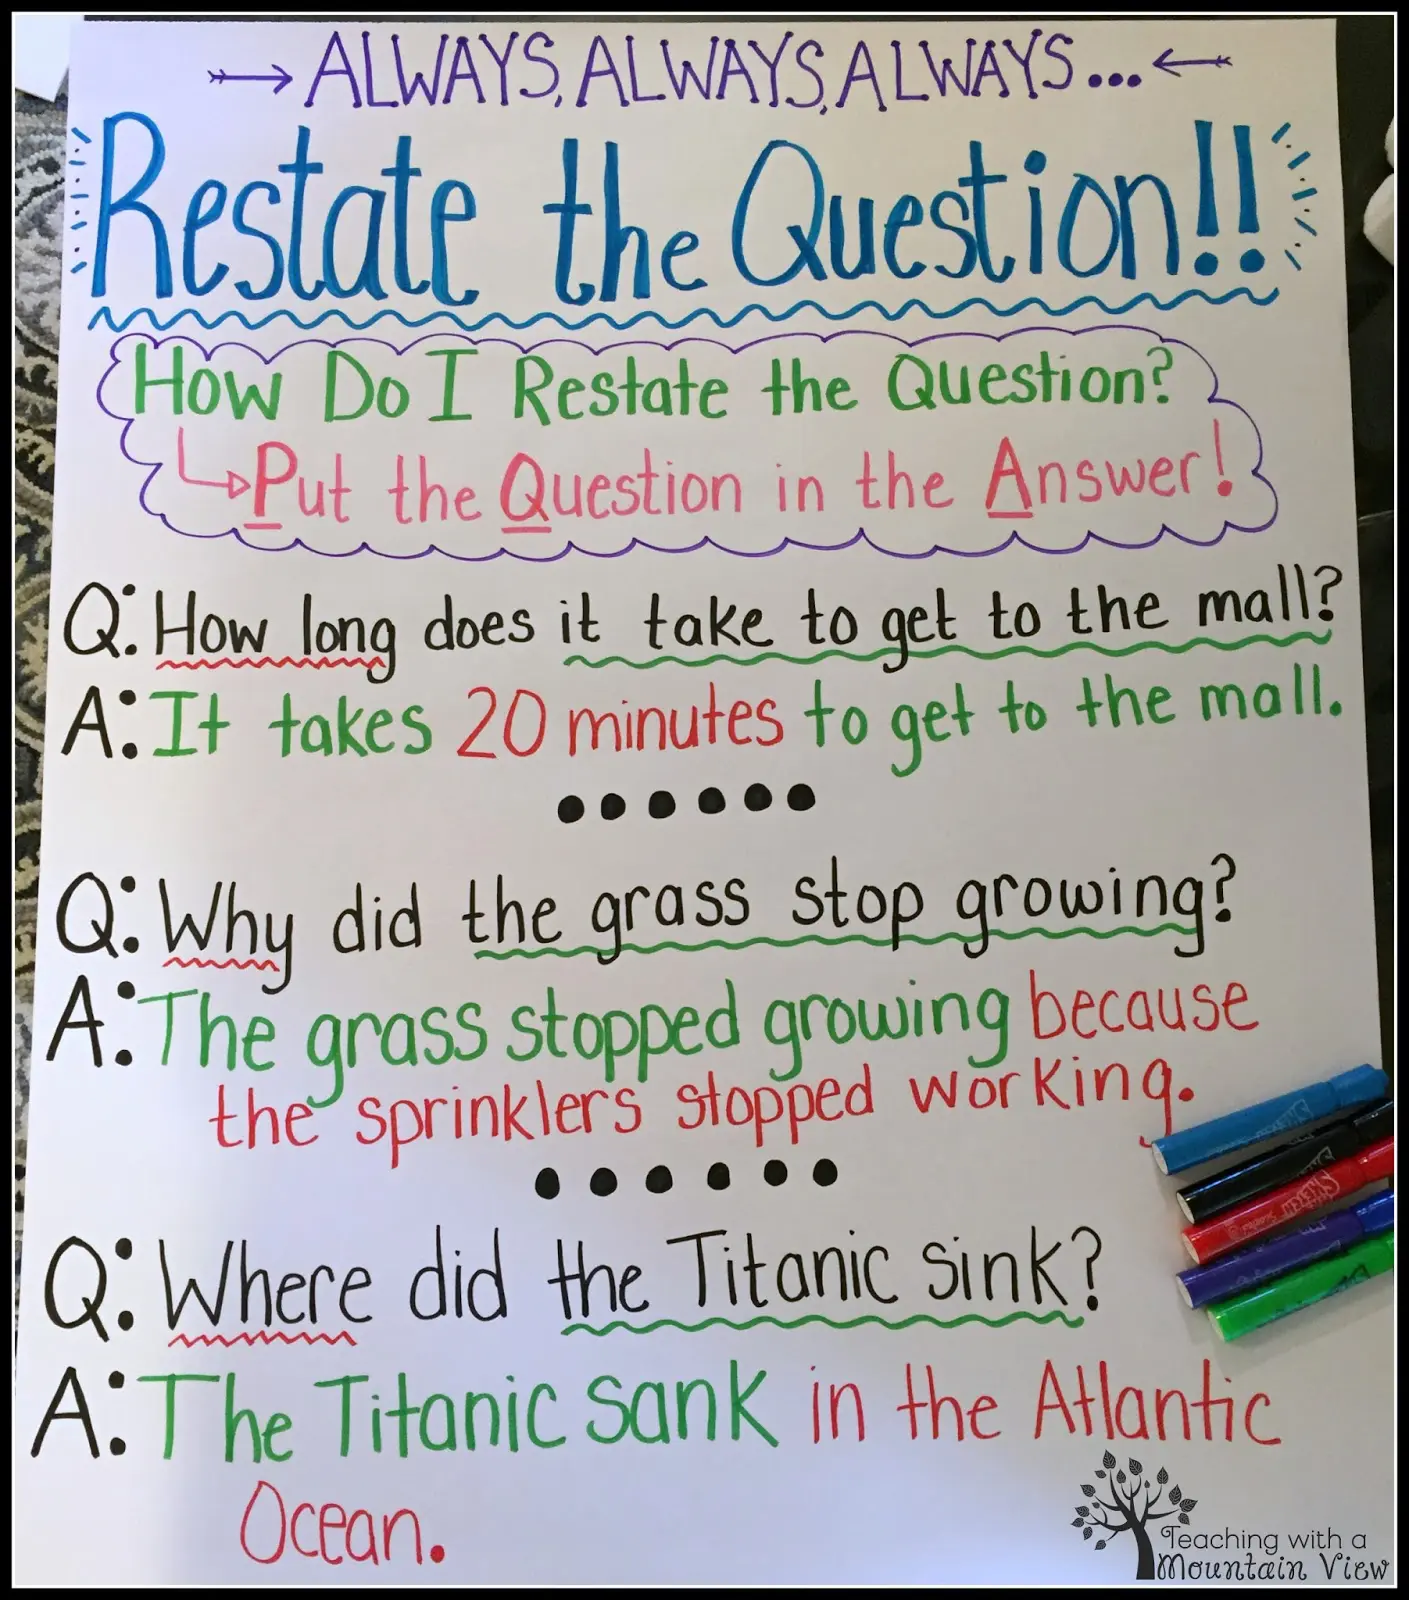 teach students to PQA or restate the question for test prep